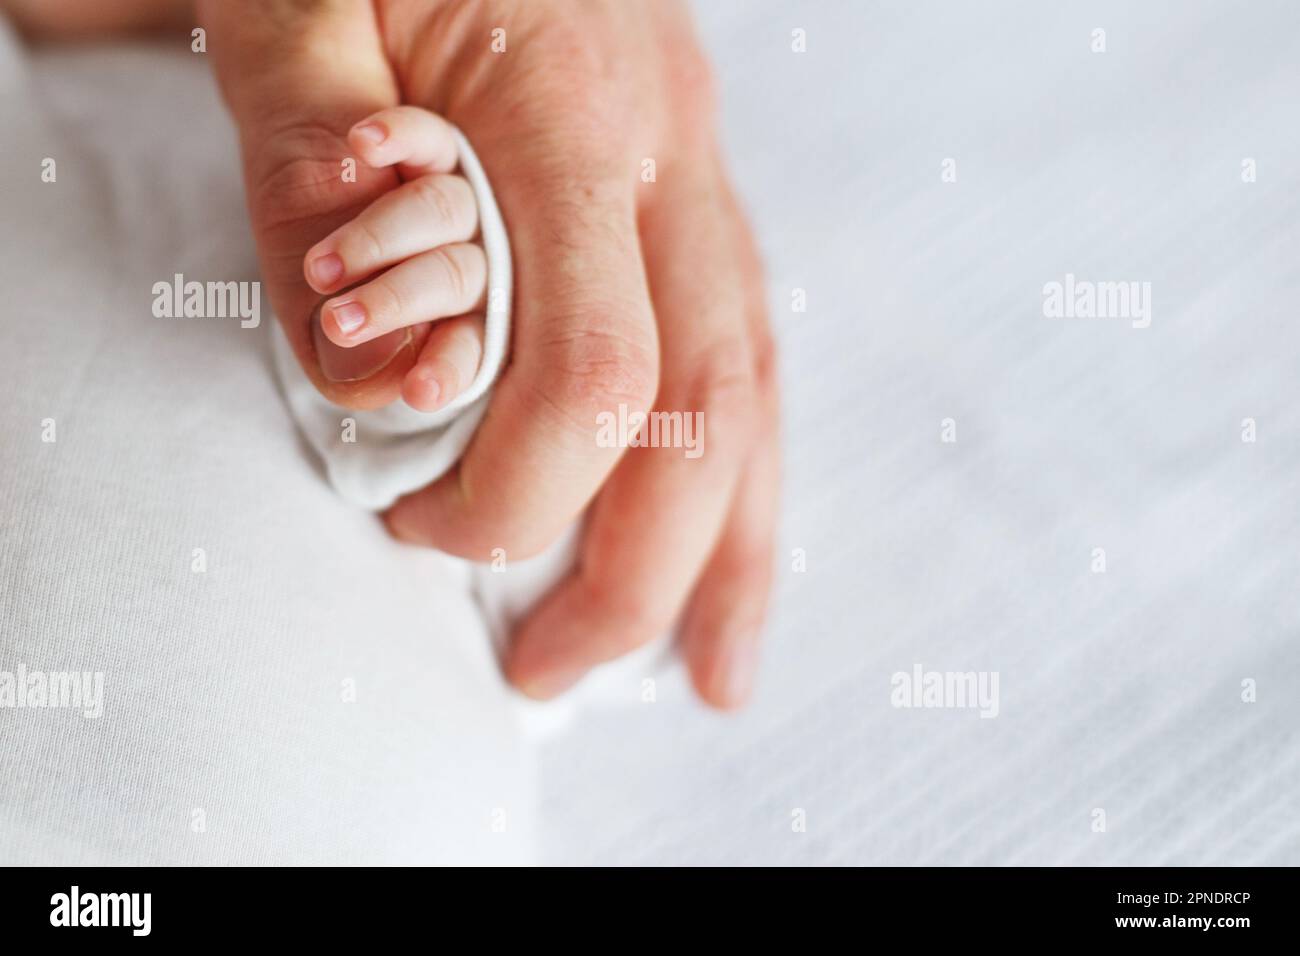 Close up photo of father holding baby hand. New family, care, love and baby protection concept. Stock Photo